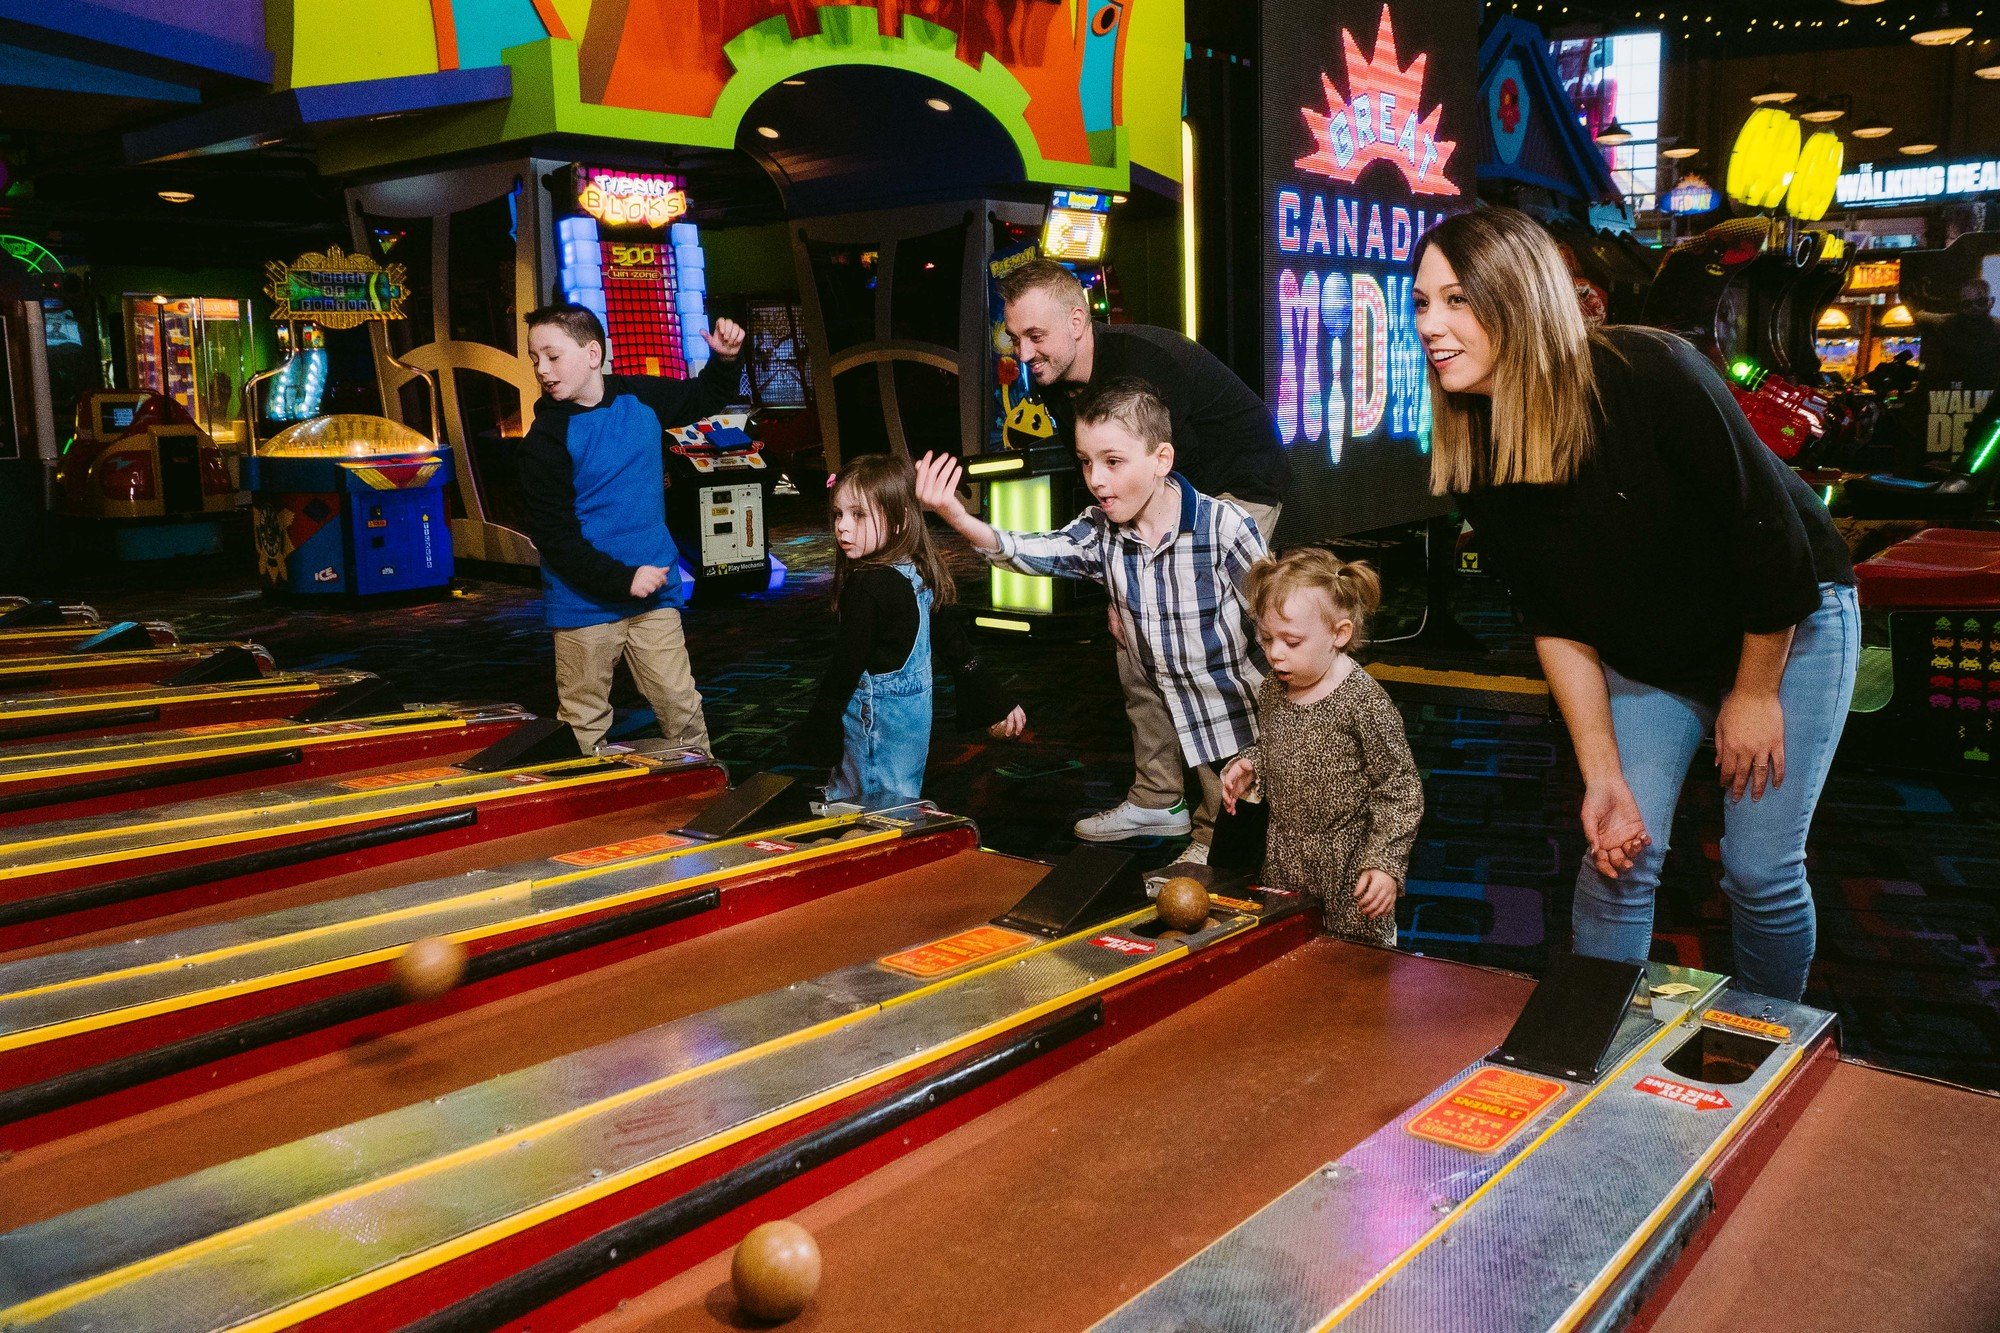 Skeet ball family having a game together